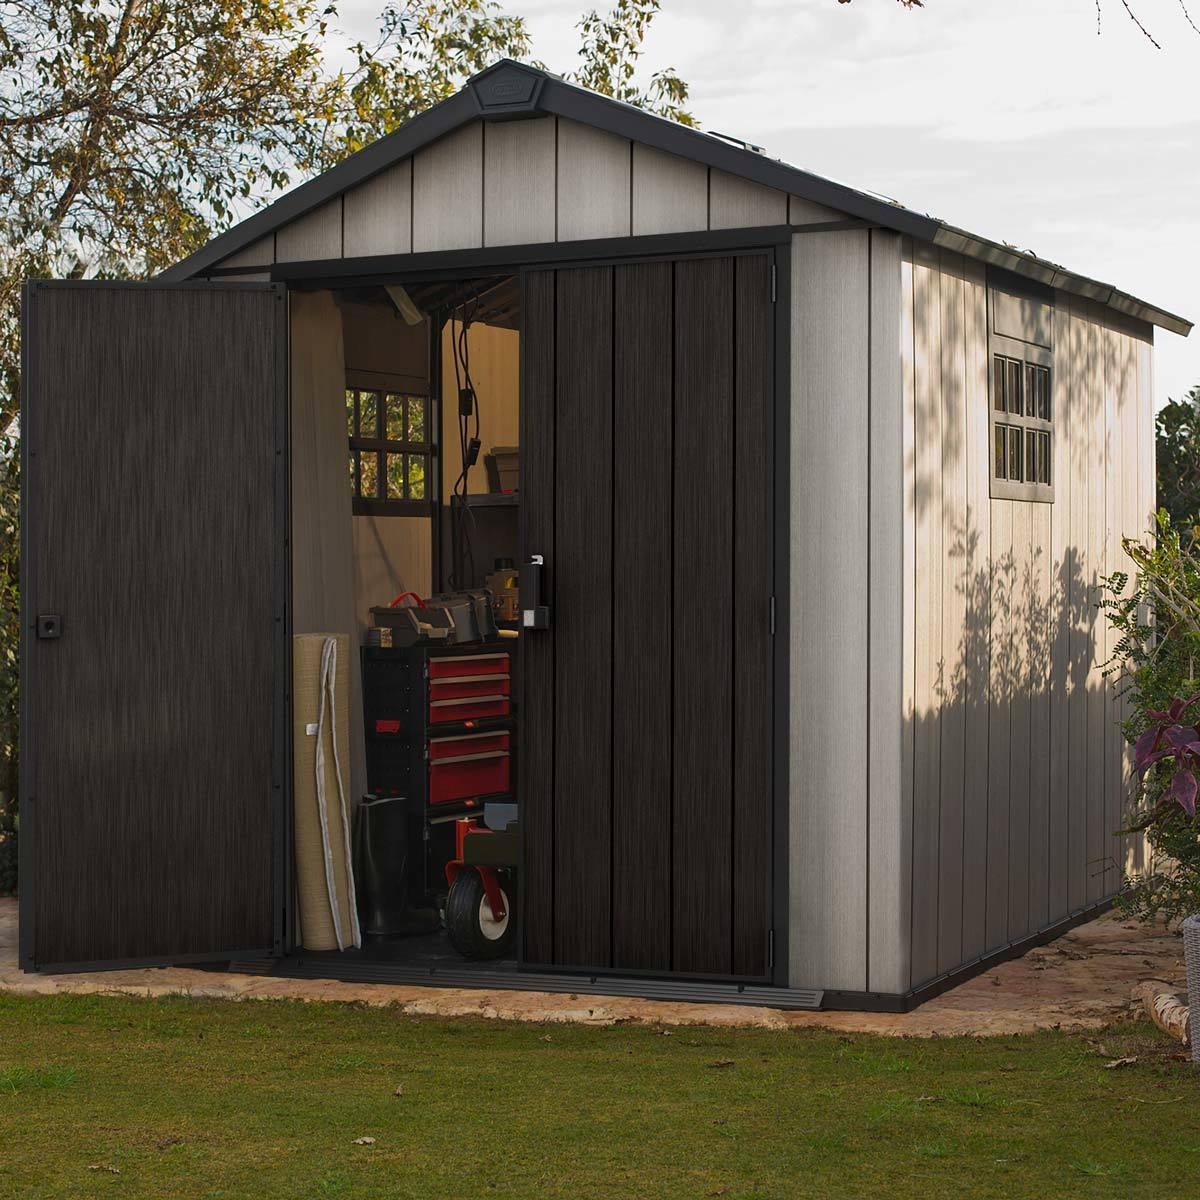 Keter Oakland 7ft 6" x 11ft (2.3 x 3.4m) Shed - Signature Retail Stores